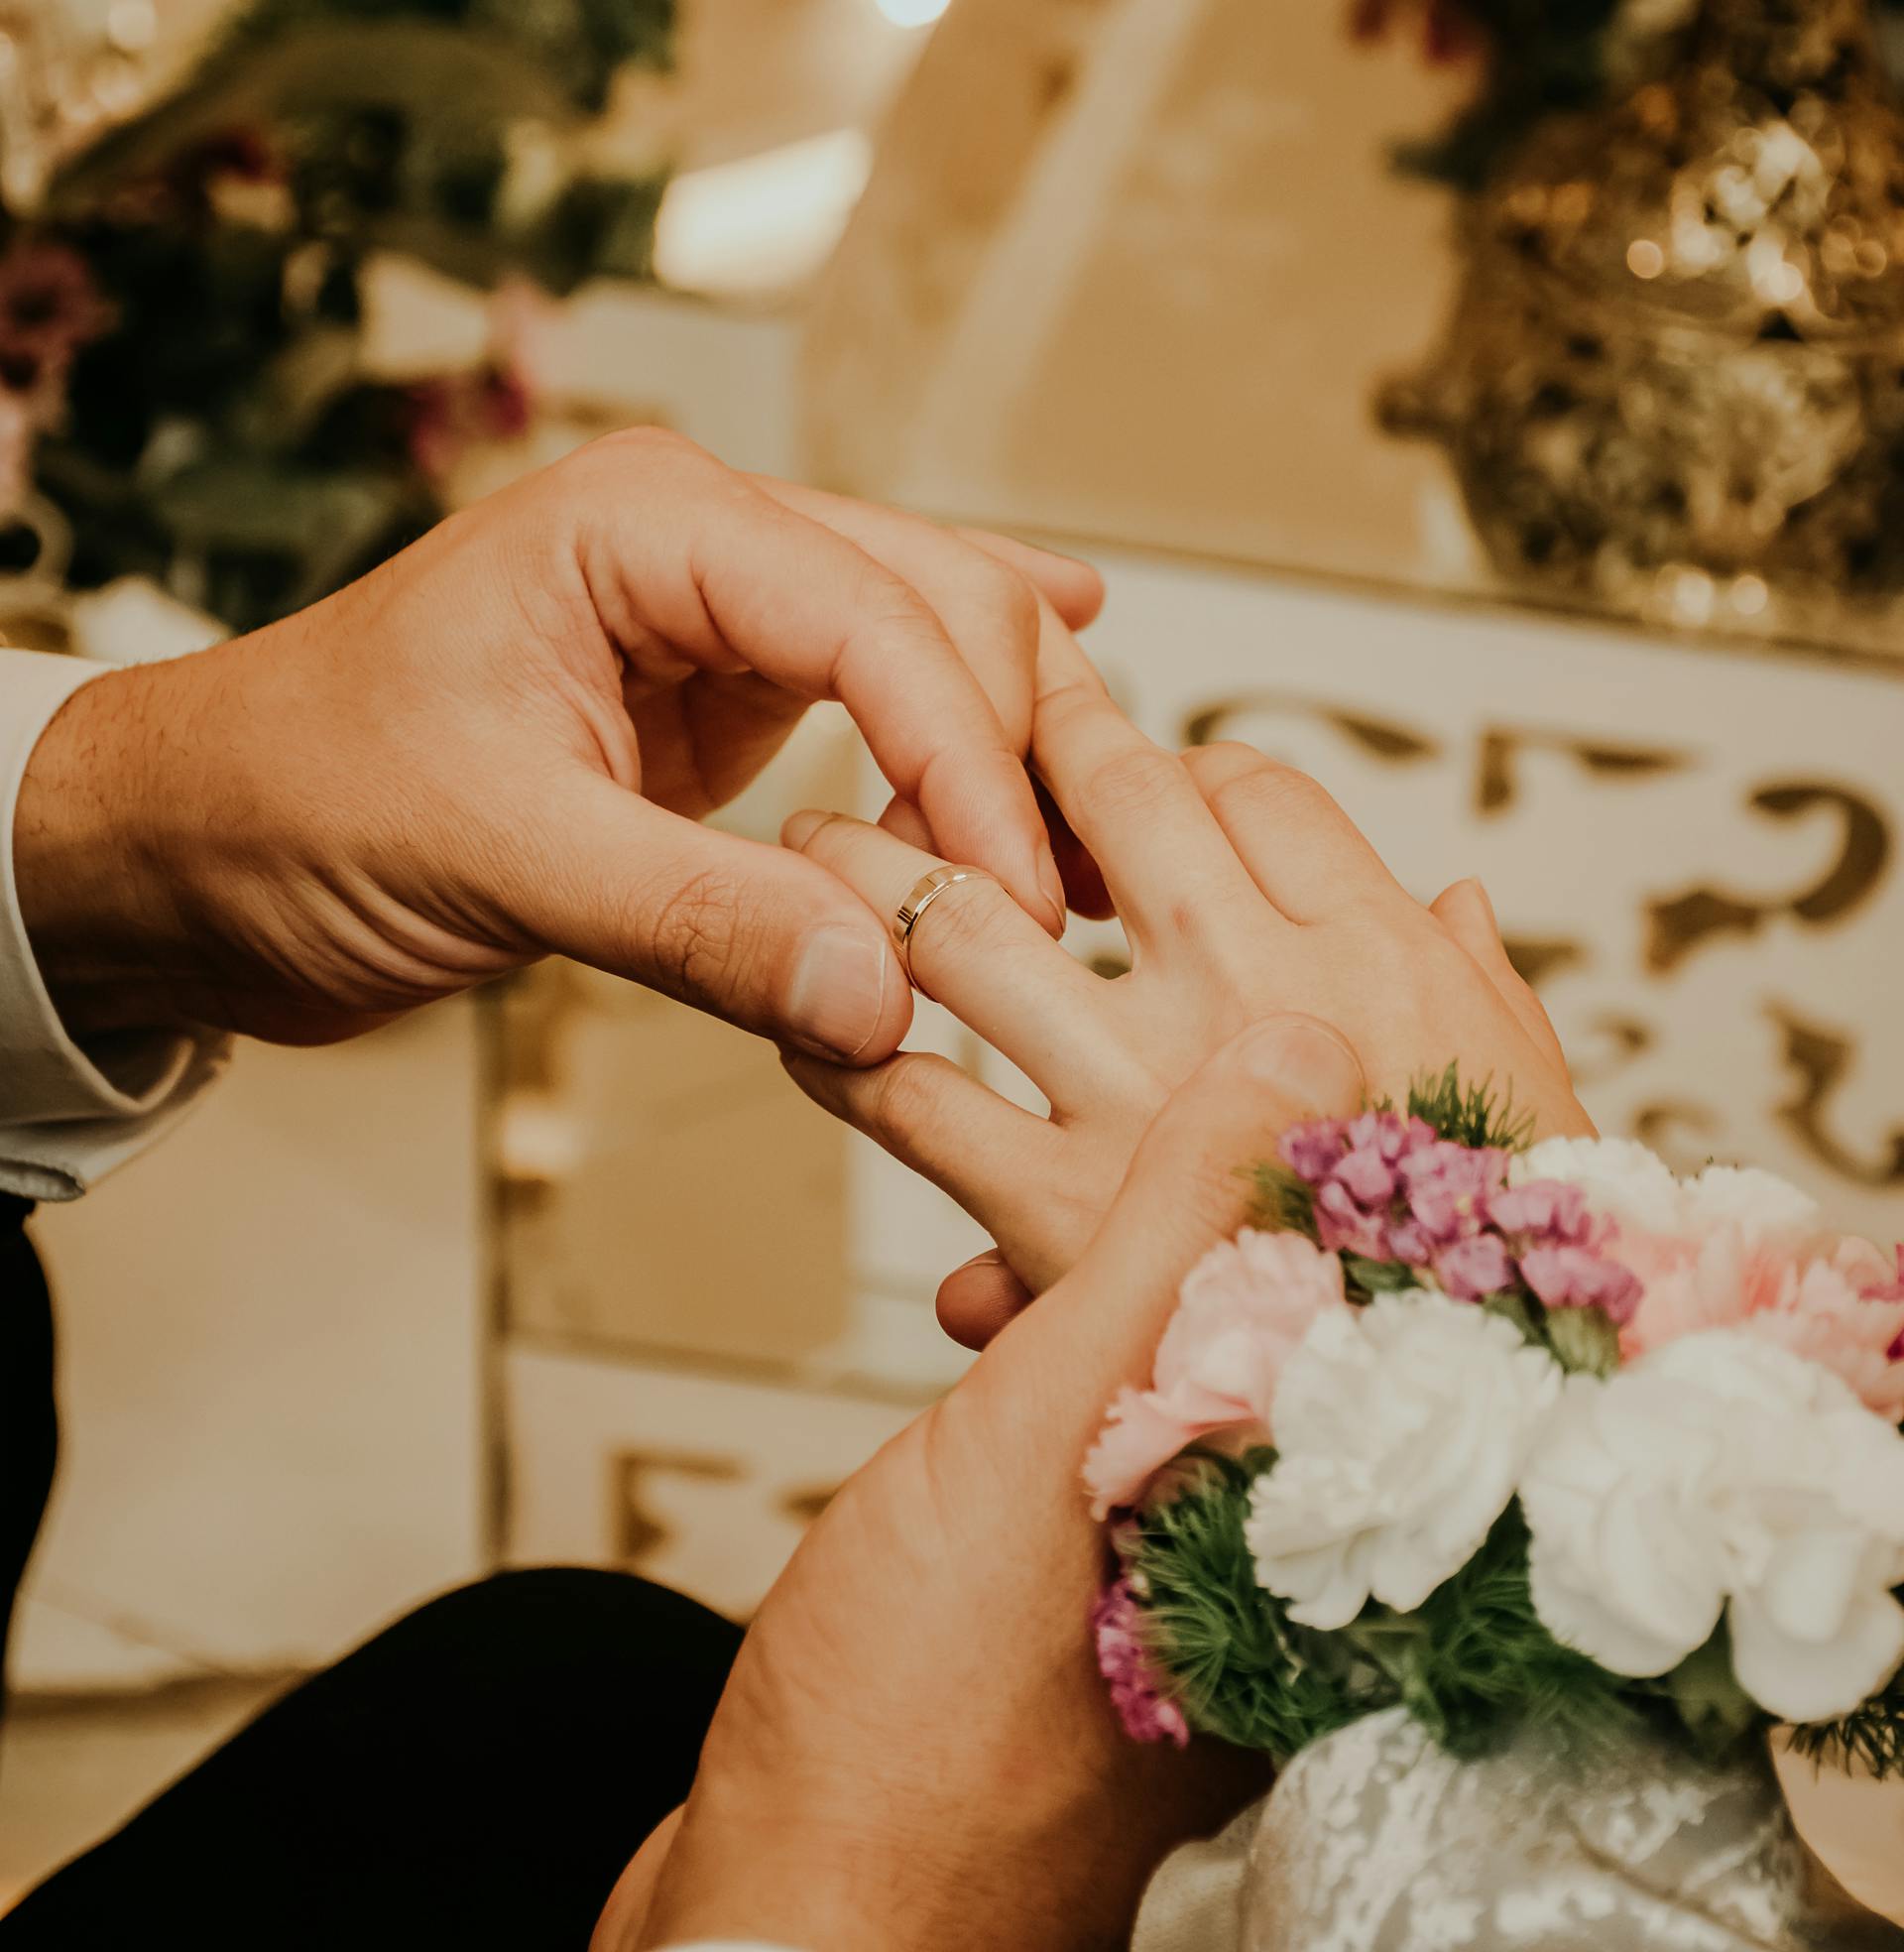 A groom putting on the bride's ring | Source: Pexels